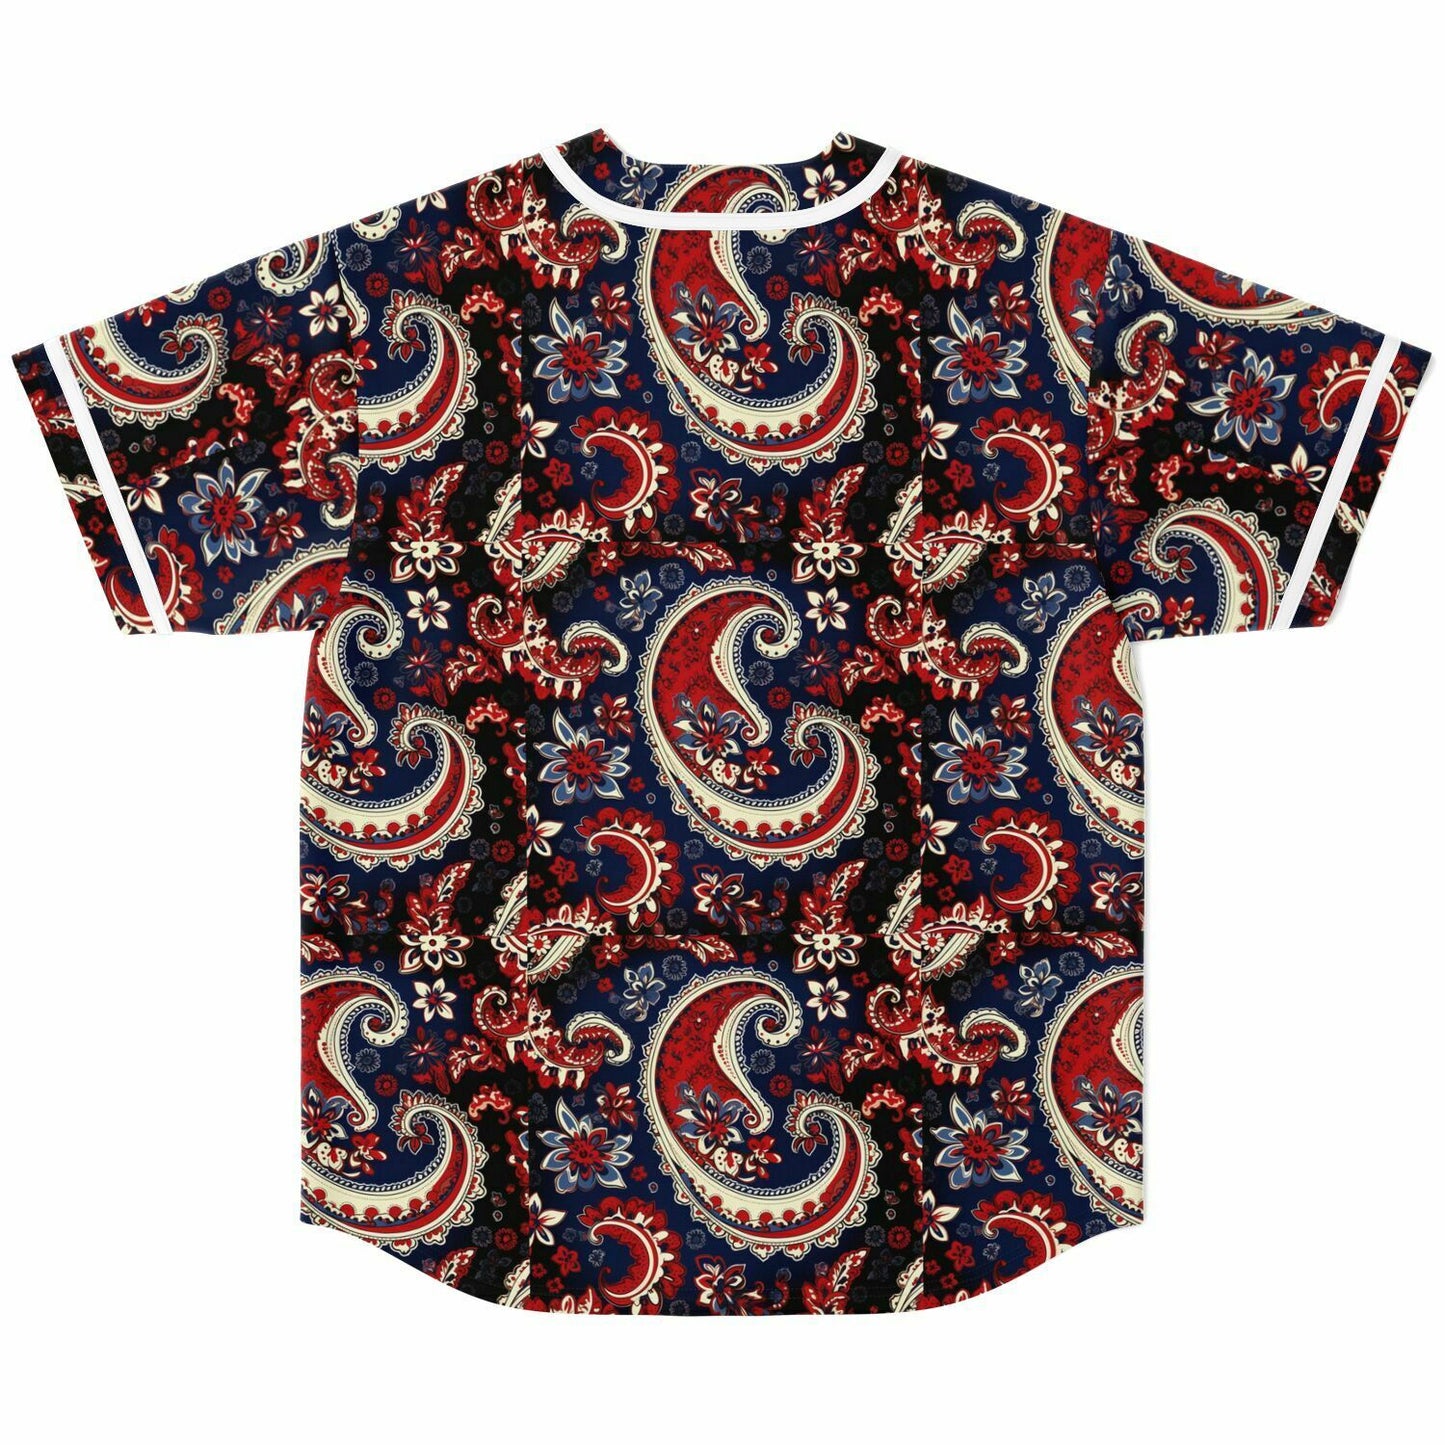 Red and Blue Baseball Jersey